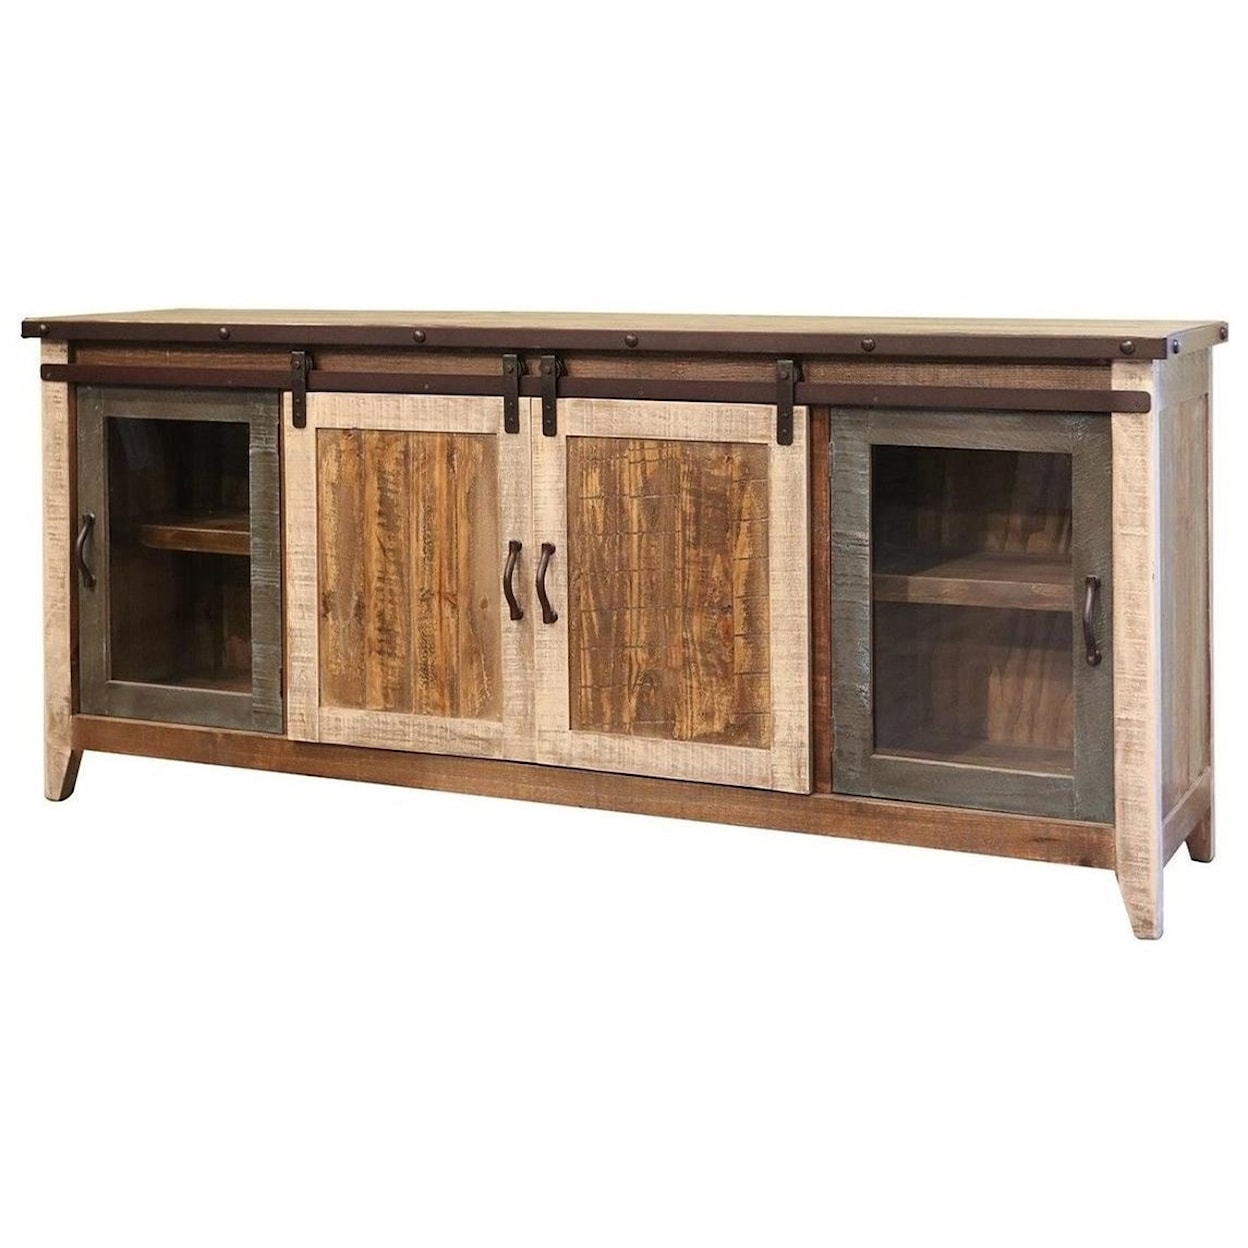 International Furniture Direct 900 Antique TV Stand with Sliding Doors